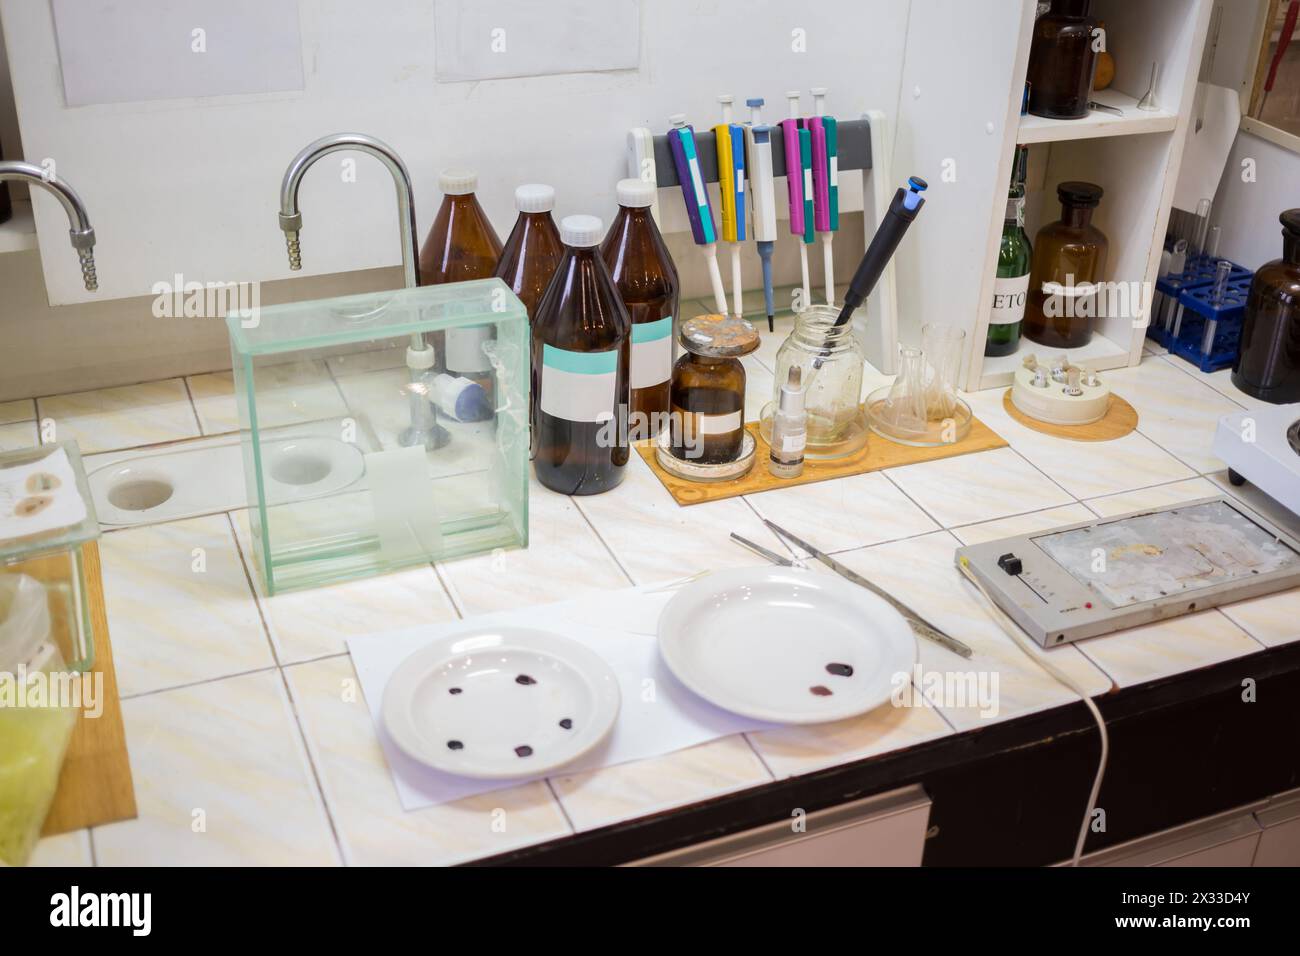 Chemical laboratory with preparations and burners for warming. Stock Photo